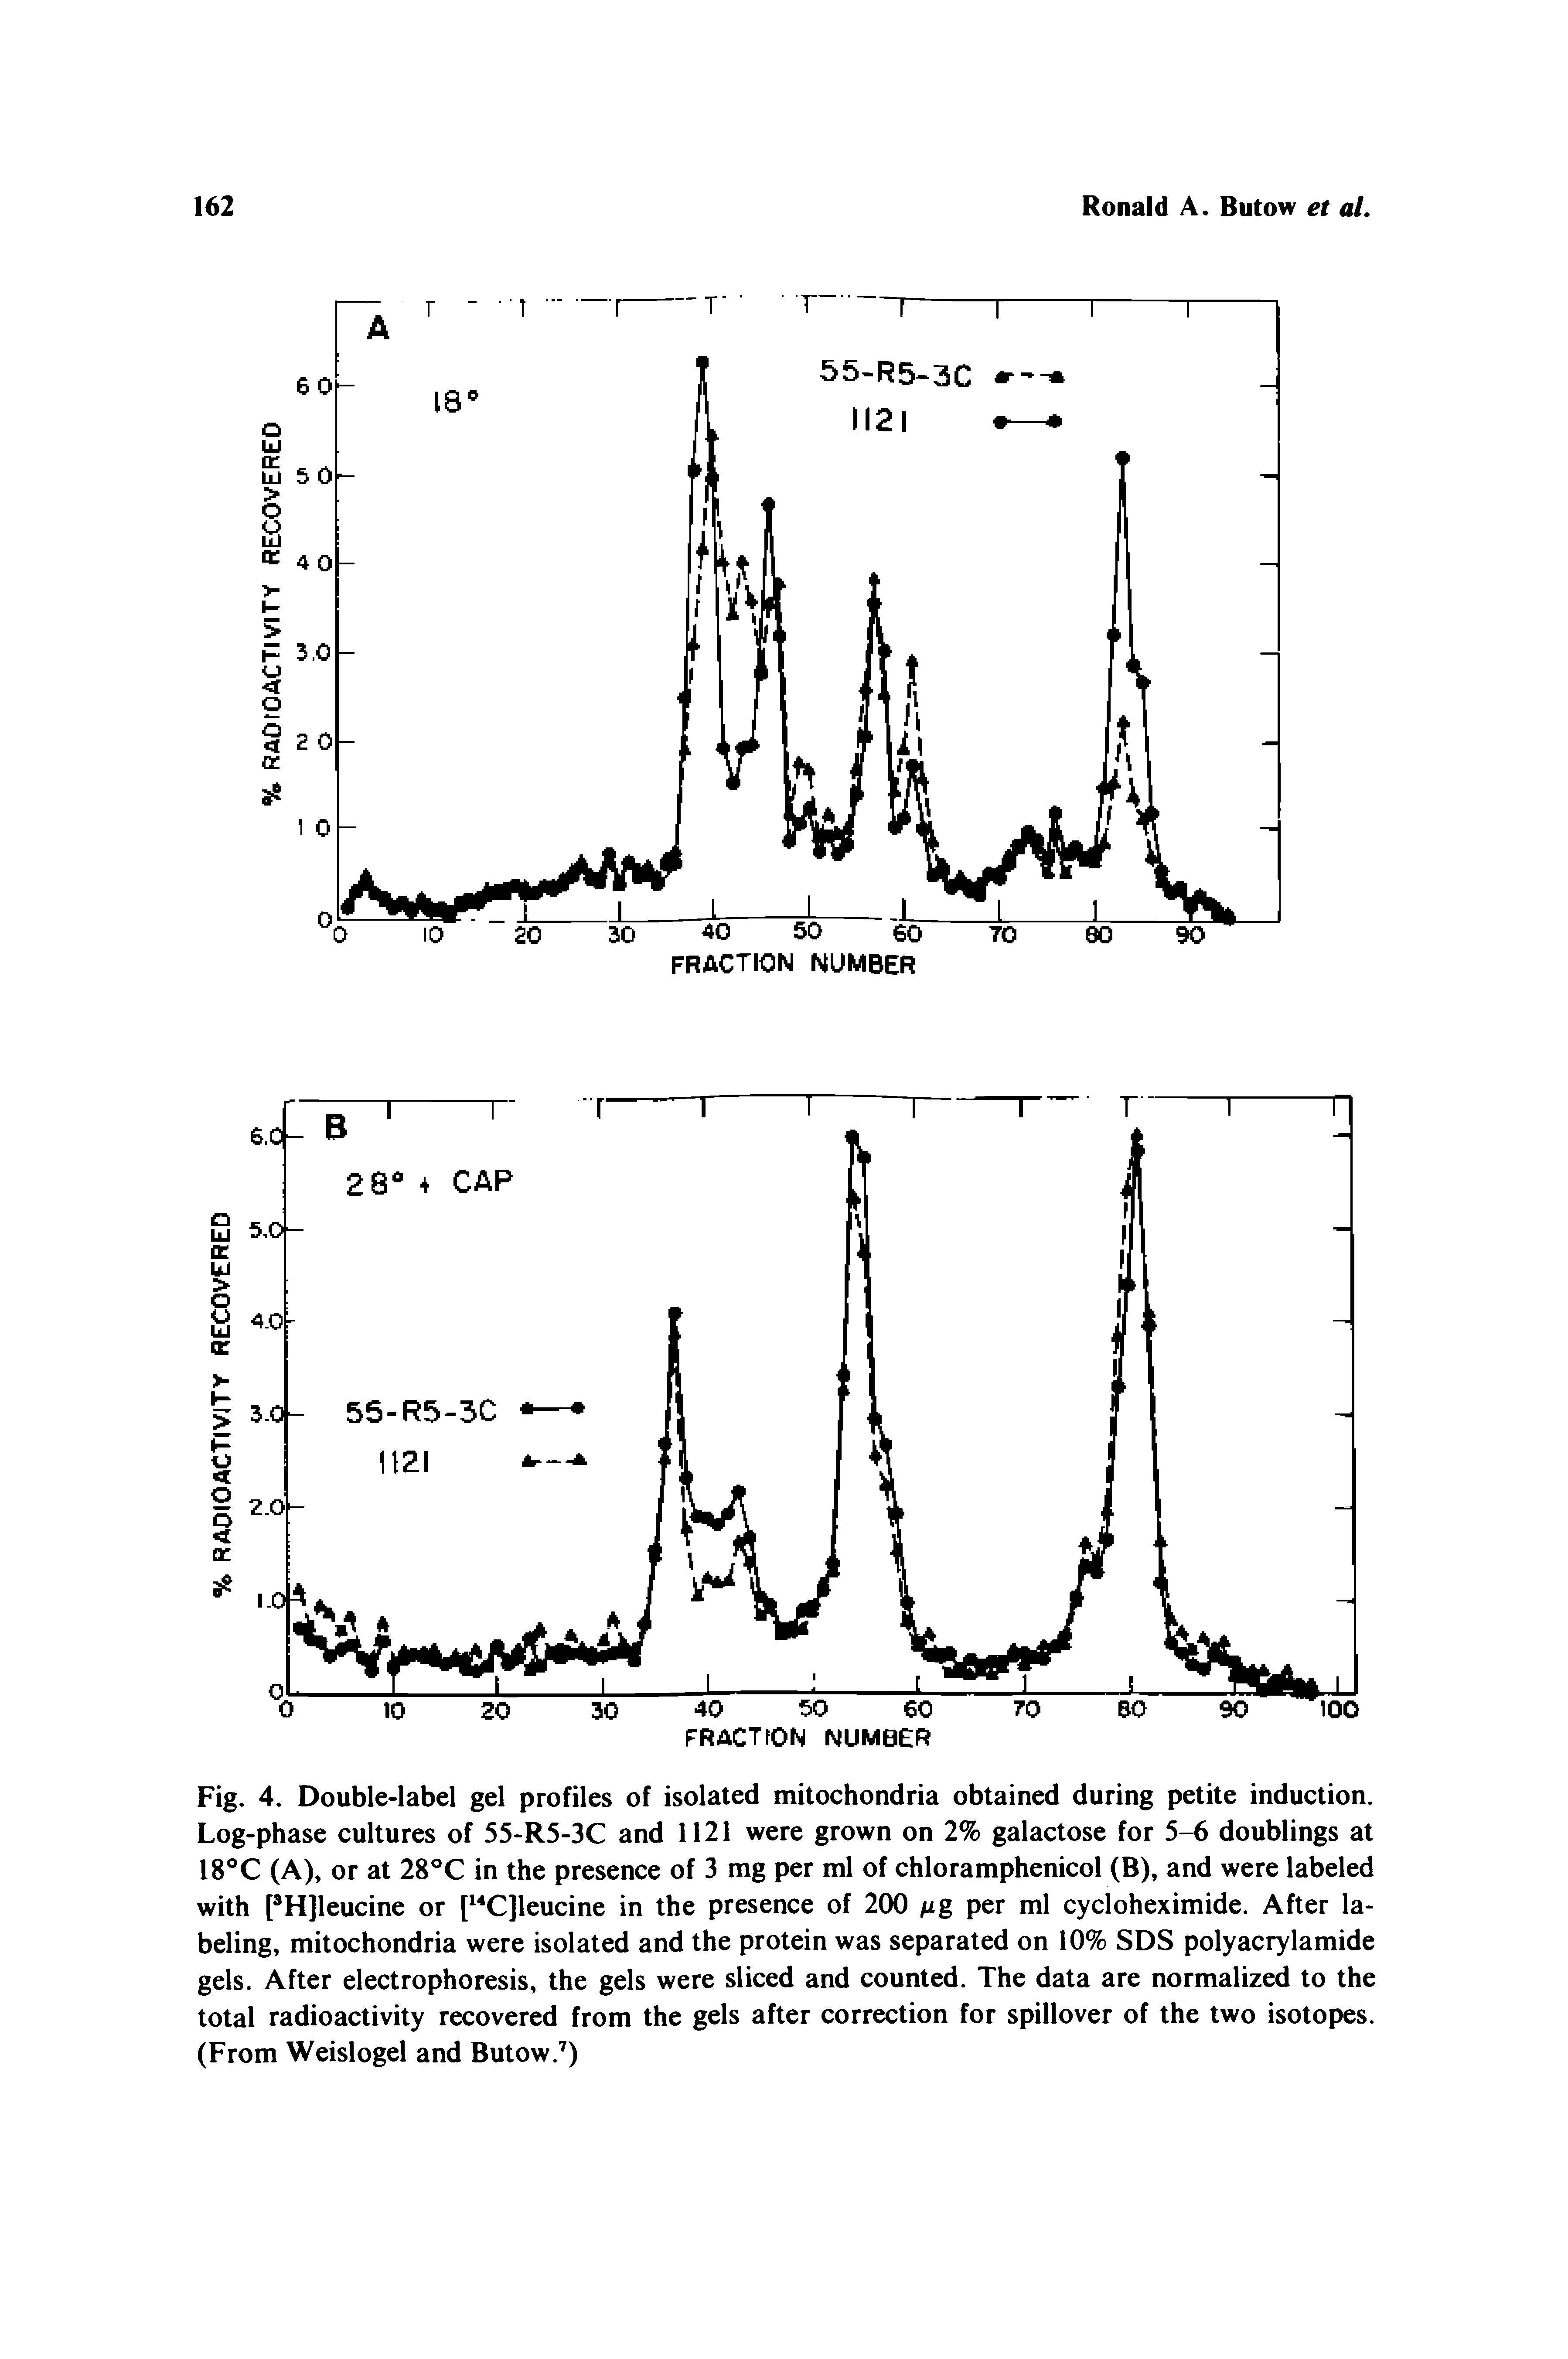 Fig. 4. Double-label gel profiles of isolated mitochondria obtained during petite induction. Log-phase cultures of 55-R5-3C and 1121 were grown on 2% galactose for 5-6 doublings at 18°C (A), or at 28°C in the presence of 3 mg per ml of chloramphenicol (B), and were labeled with [ H]leucine or [ C]leucine in the presence of 200 Mg per ml cycloheximide. After labeling, mitochondria were isolated and the protein was separated on 10% SDS polyacrylamide gels. After electrophoresis, the gels were sliced and counted. The data are normalized to the total radioactivity recovered from the gels after correction for spillover of the two isotopes. (From Weislogel and Butow. )...